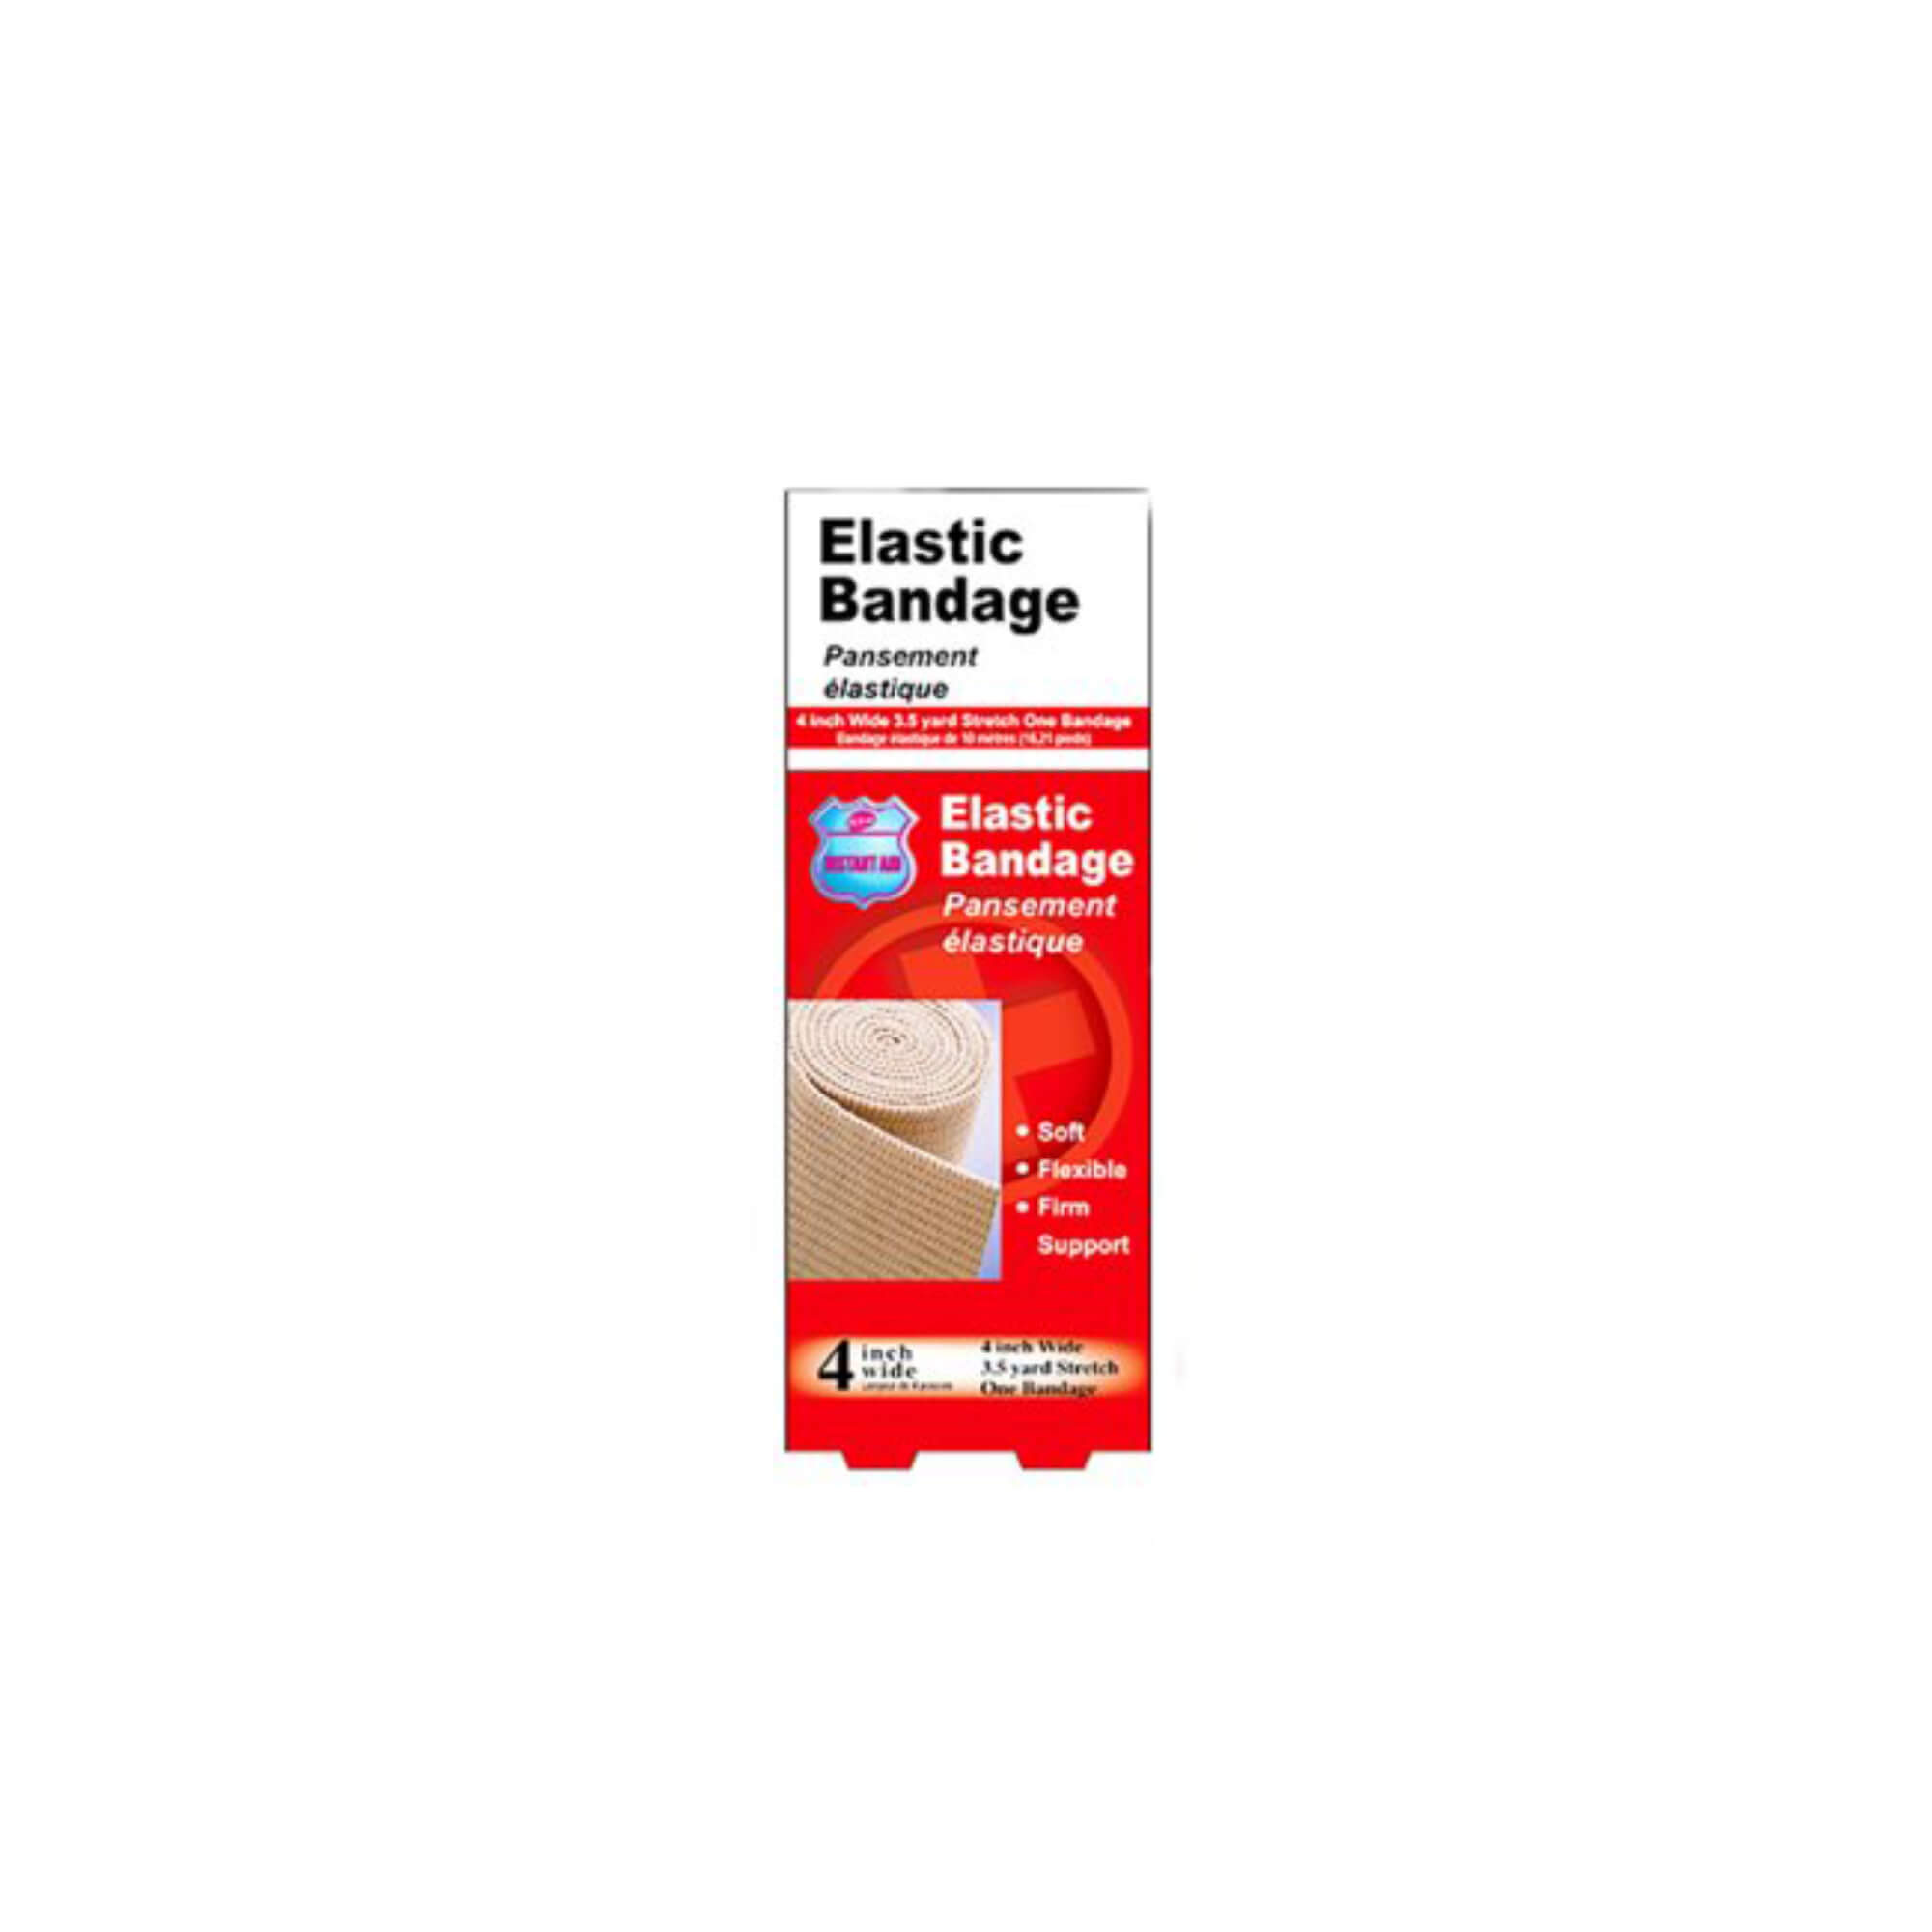 Instant Aid - 3 Inch Wide Elastic Bandage (Pack of 6)